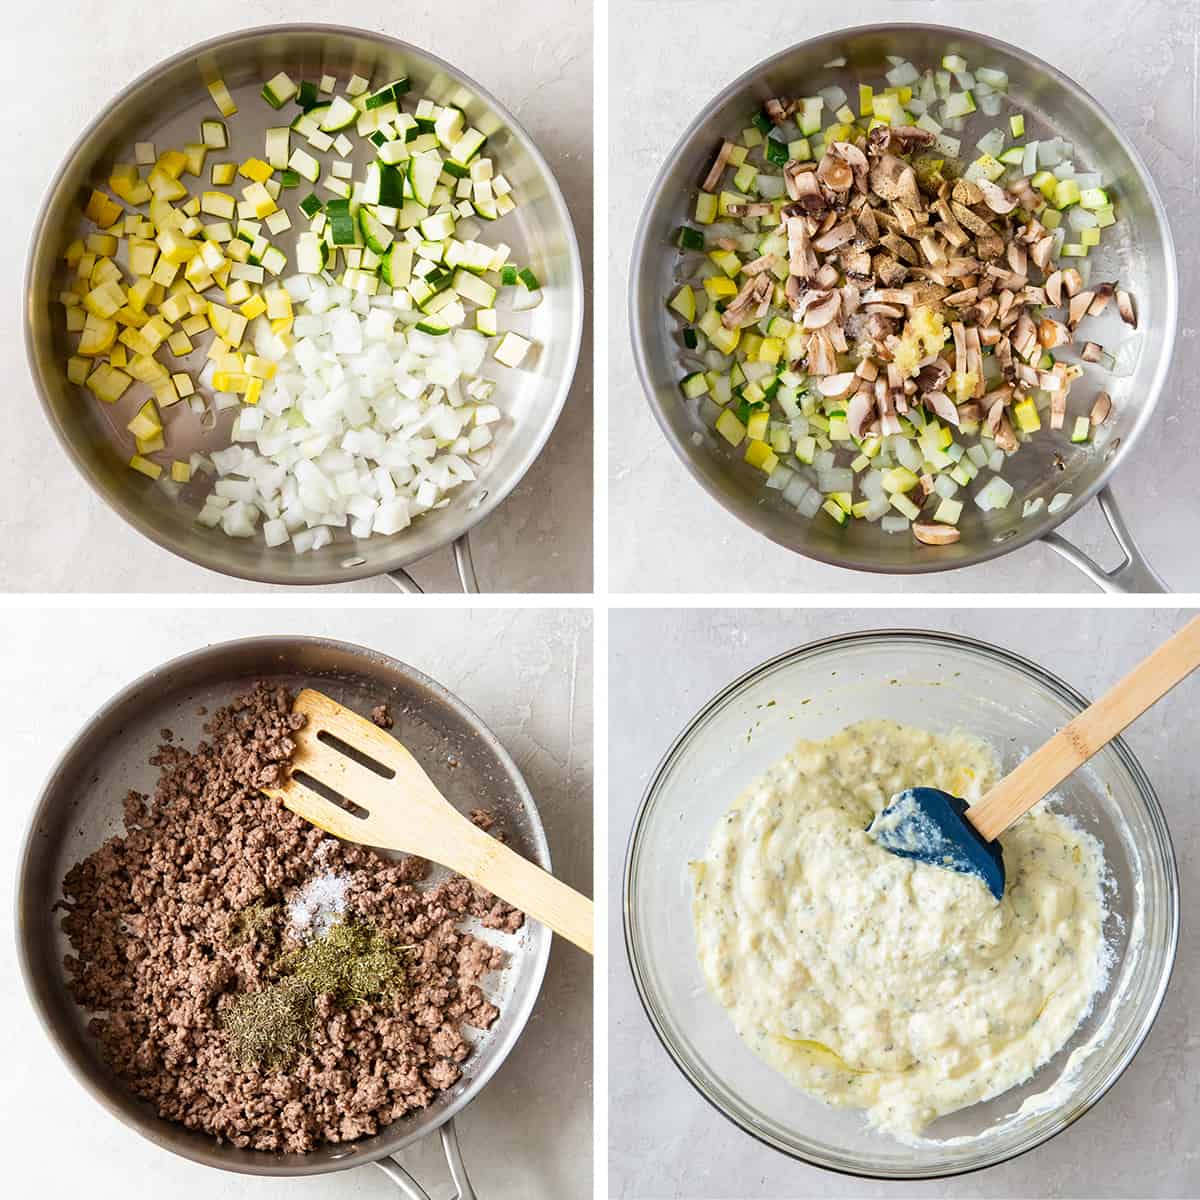 Four images that show onions, squash, mushrooms, and ground beef cooking in a skillet and a ricotta cheese and egg mixture being stirred in a glass mixing bowl.